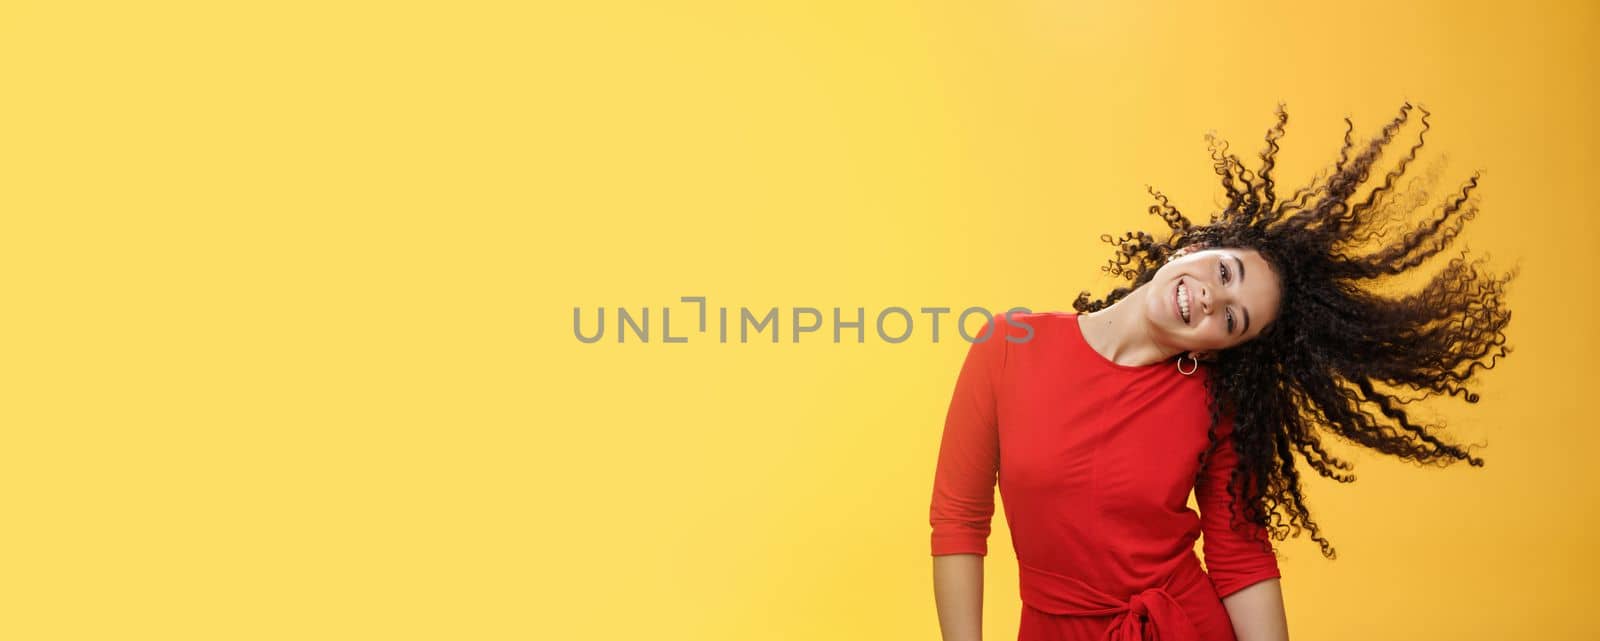 Girl getting carefree and wild waving hair and making sun with curls flying in air smiling broadly tilting head and having fun, dancing delighted and amused feeling playful against yellow background.